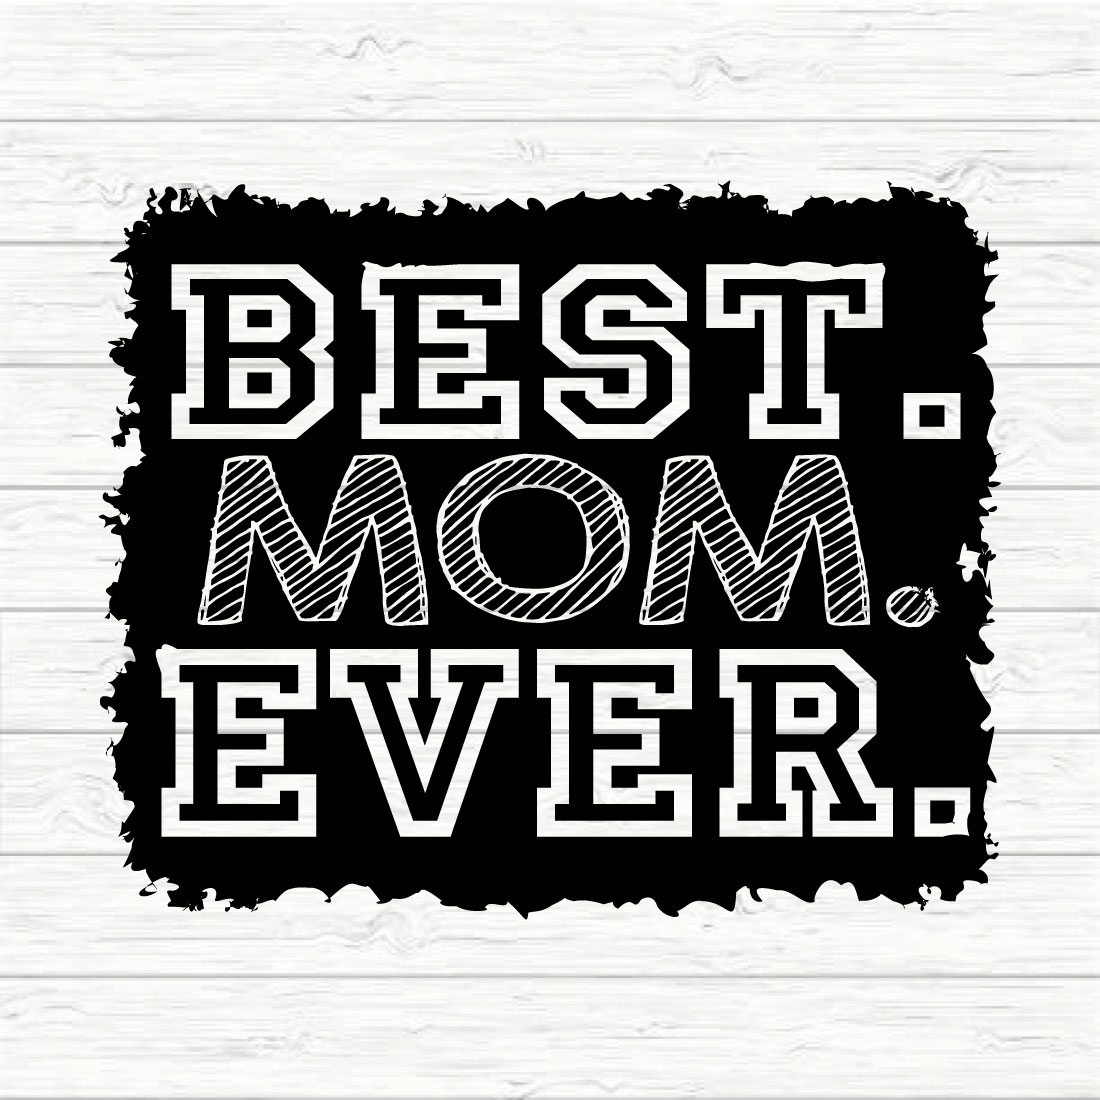 Best mom ever preview image.